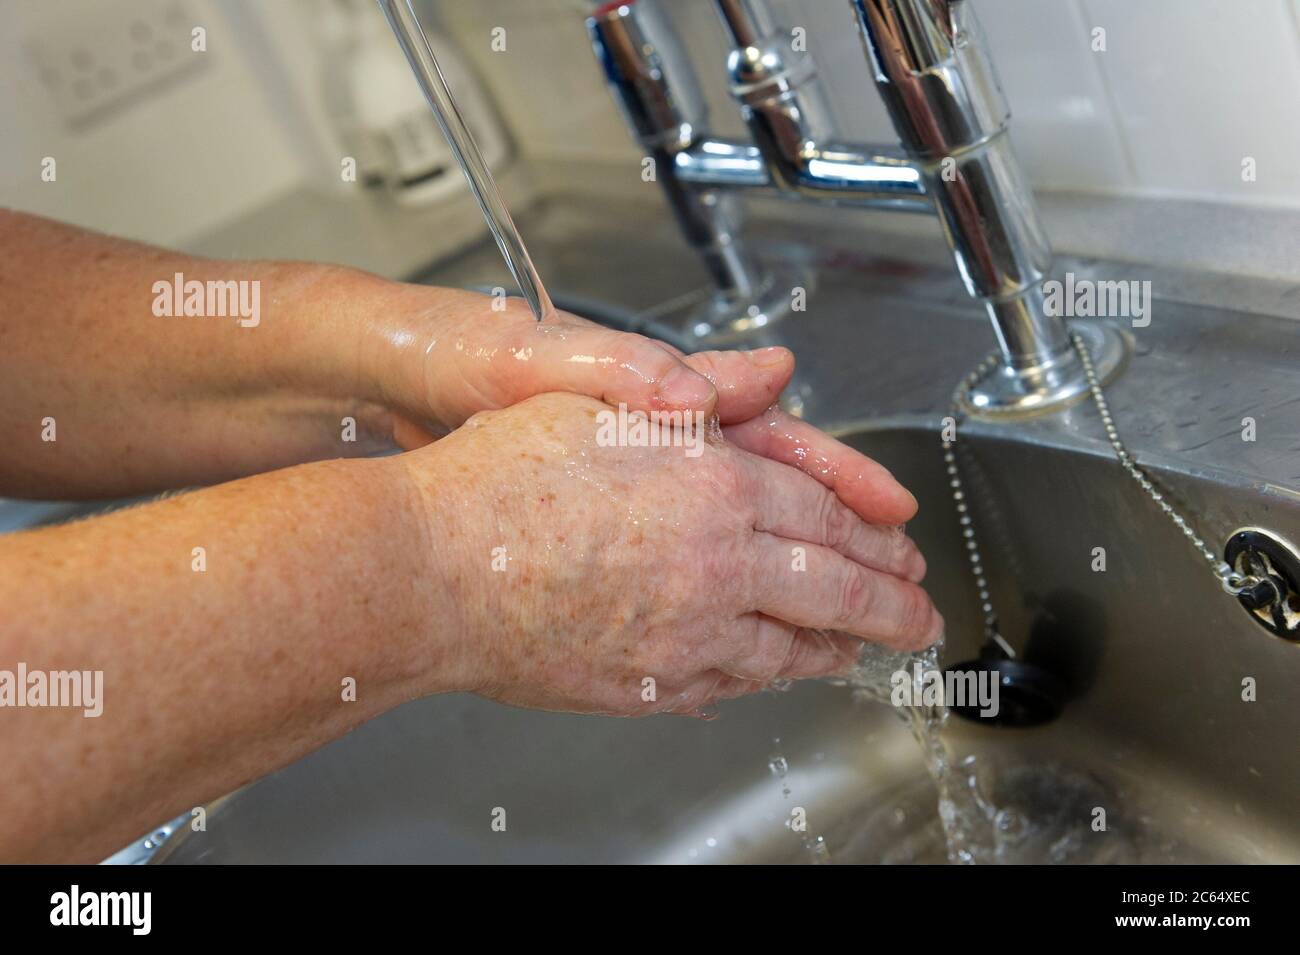 A female person washing their hands under running tap water. Stock Photo